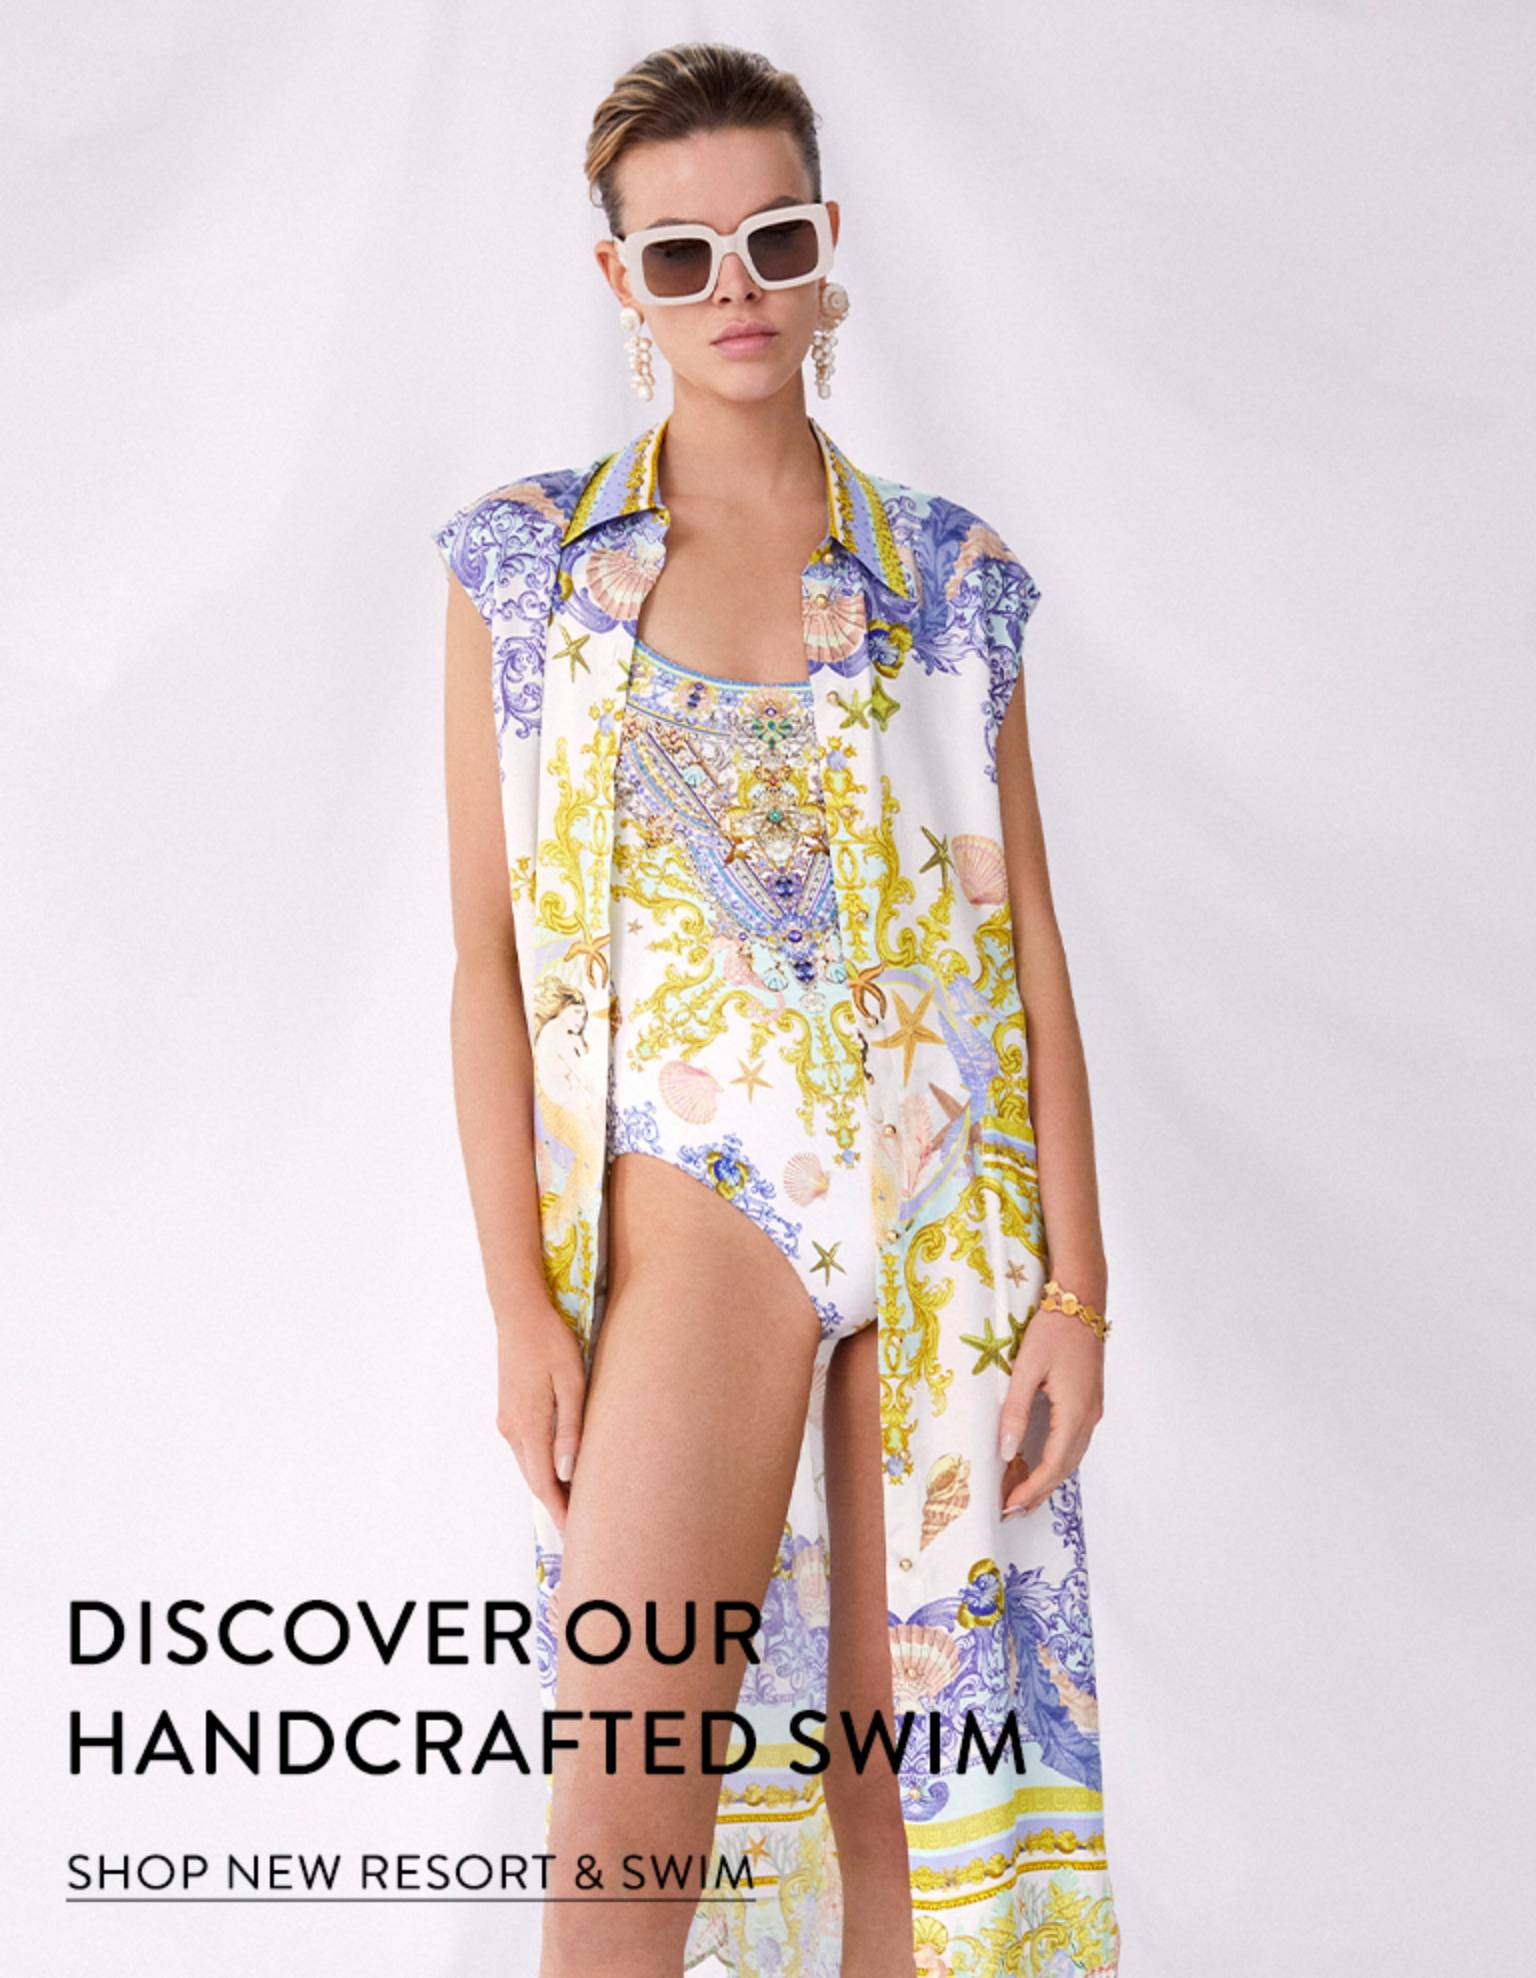 CAMILLA. Discover our handcrafted swim. Model wearing Star of the Sea printed resort and swimwear